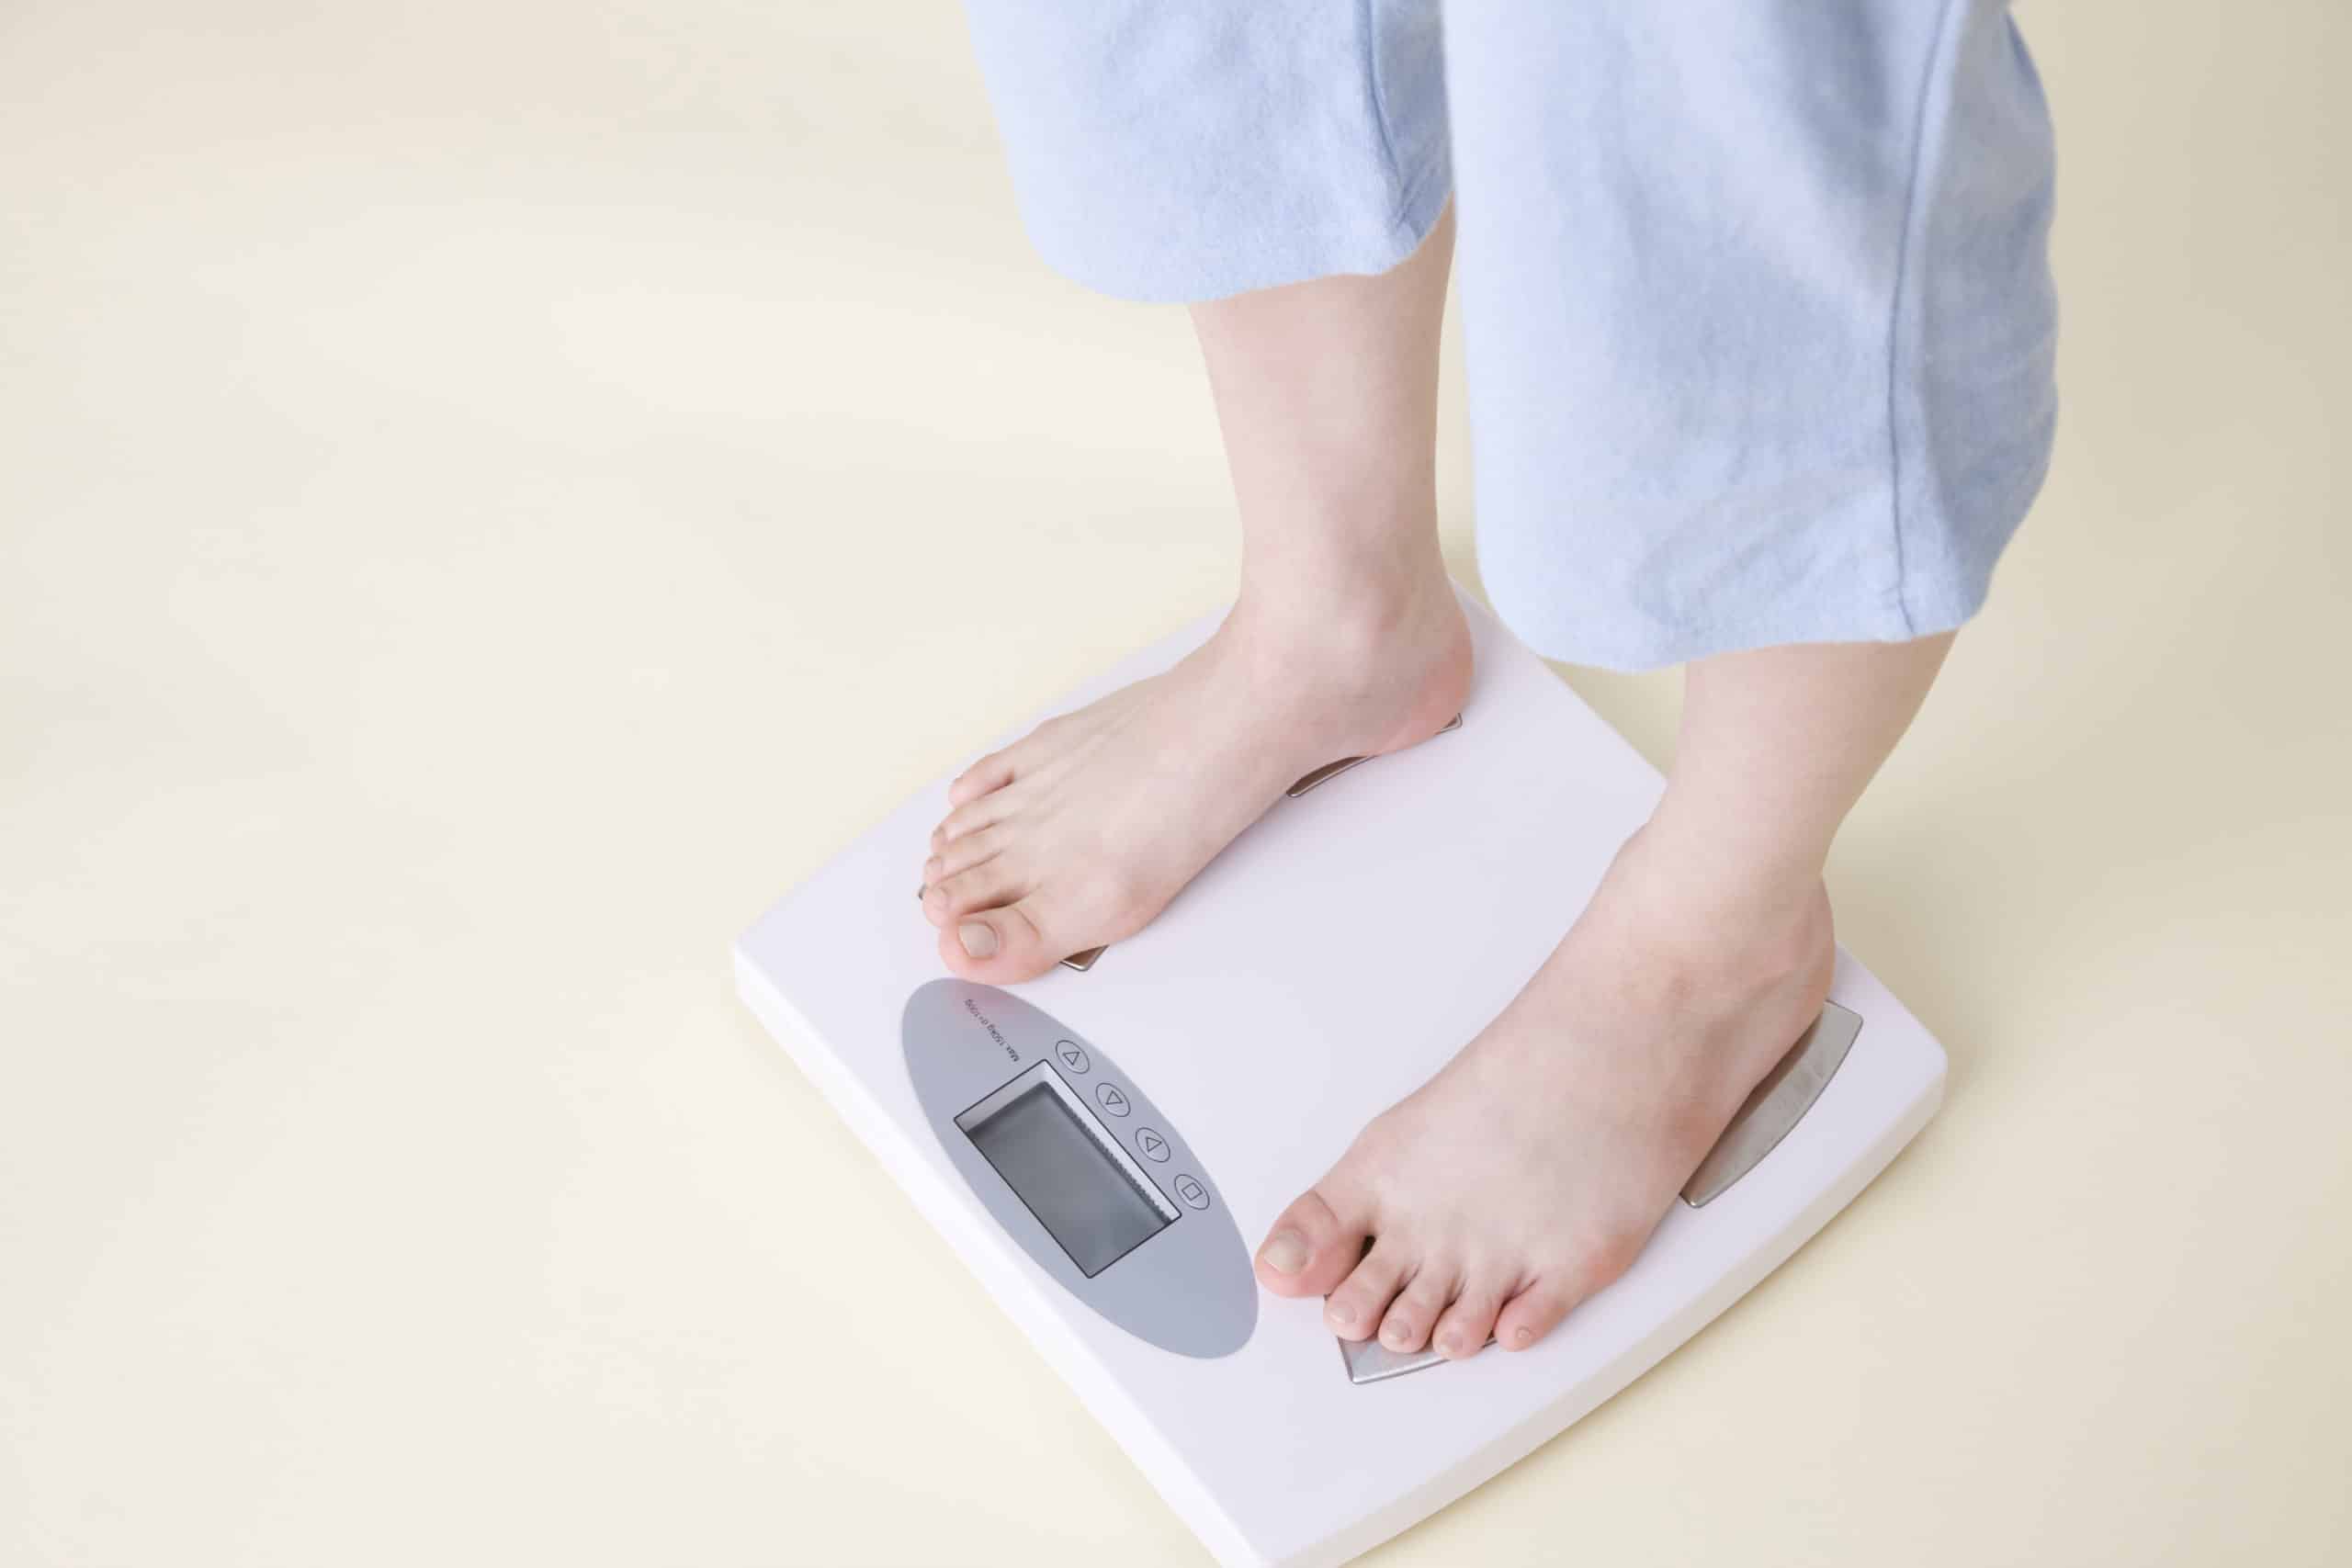 National Get On The Scales Day